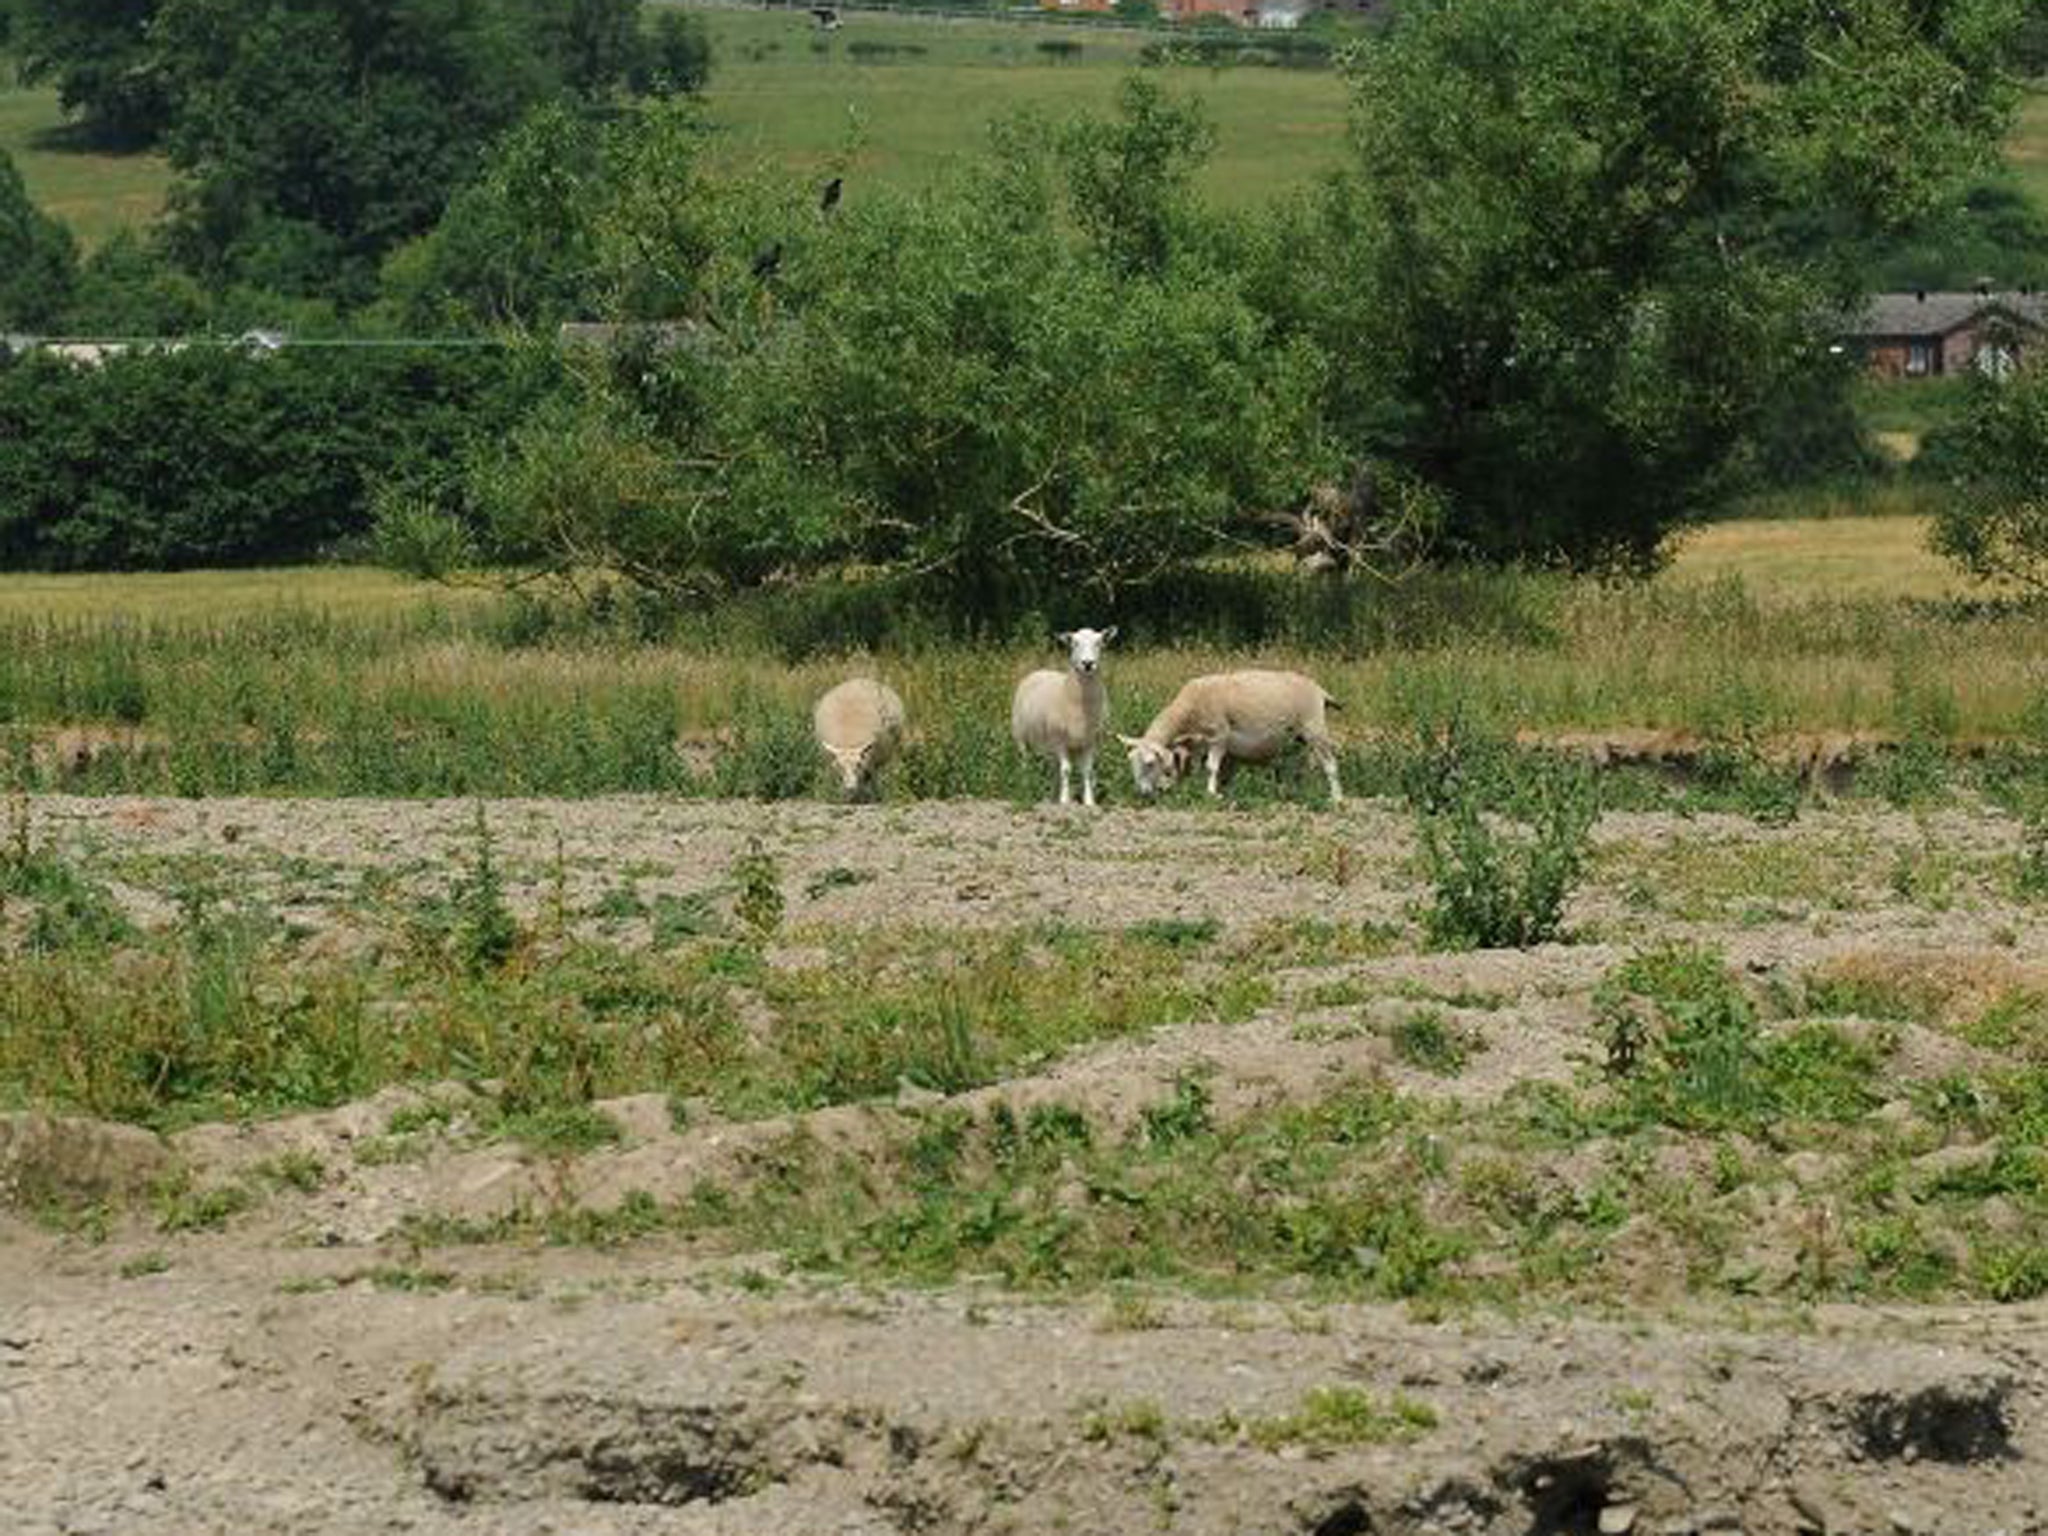 Sheep graze on a dried river bed in Hertfordshire. Heat-baked ground could lead to localised flooding in the wake of the heatwave